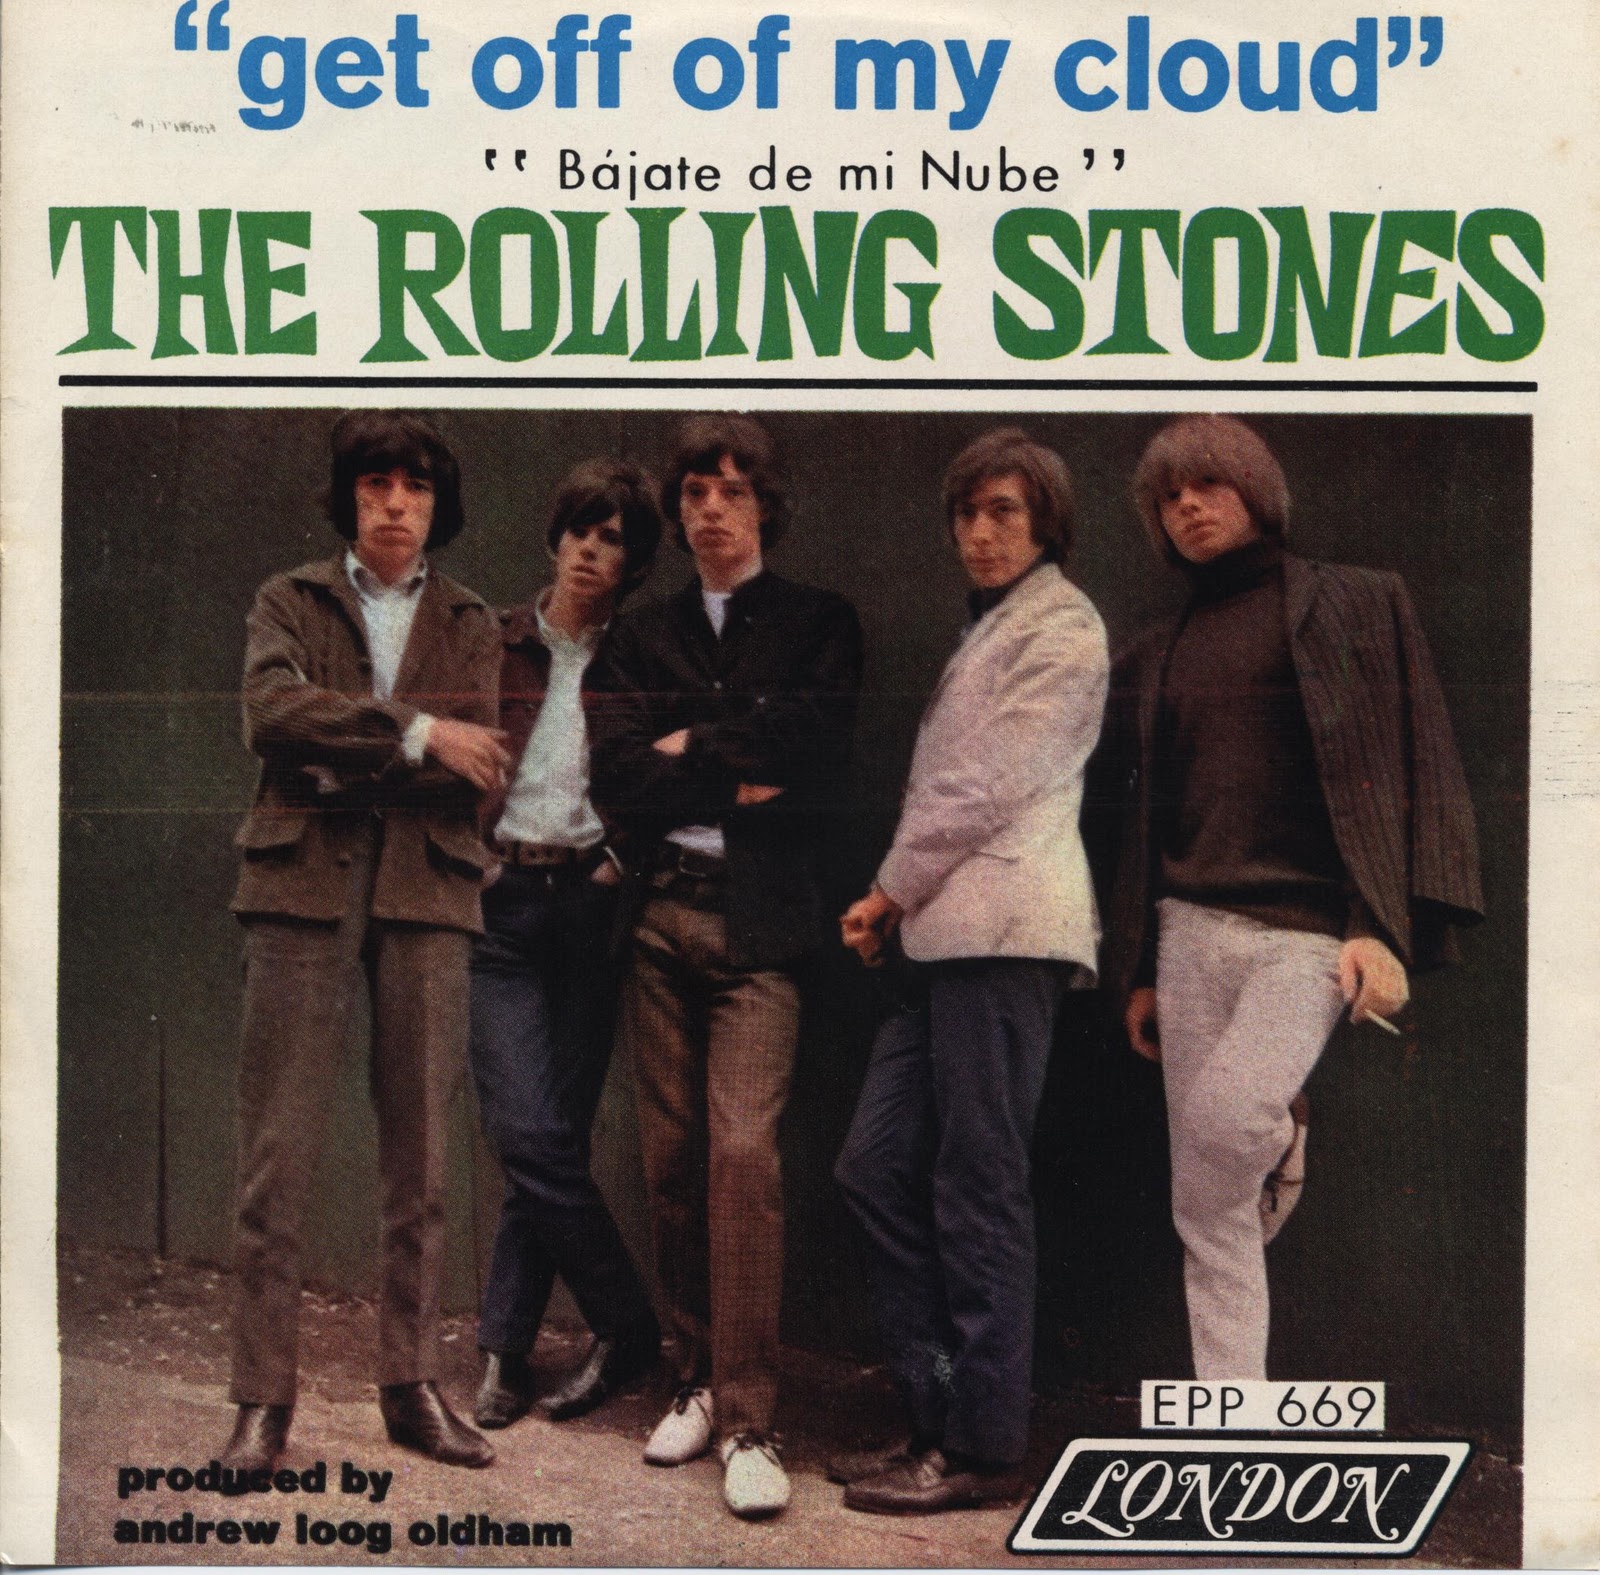 Rolling stones get. Get off of my cloud the Rolling Stones. Get off.